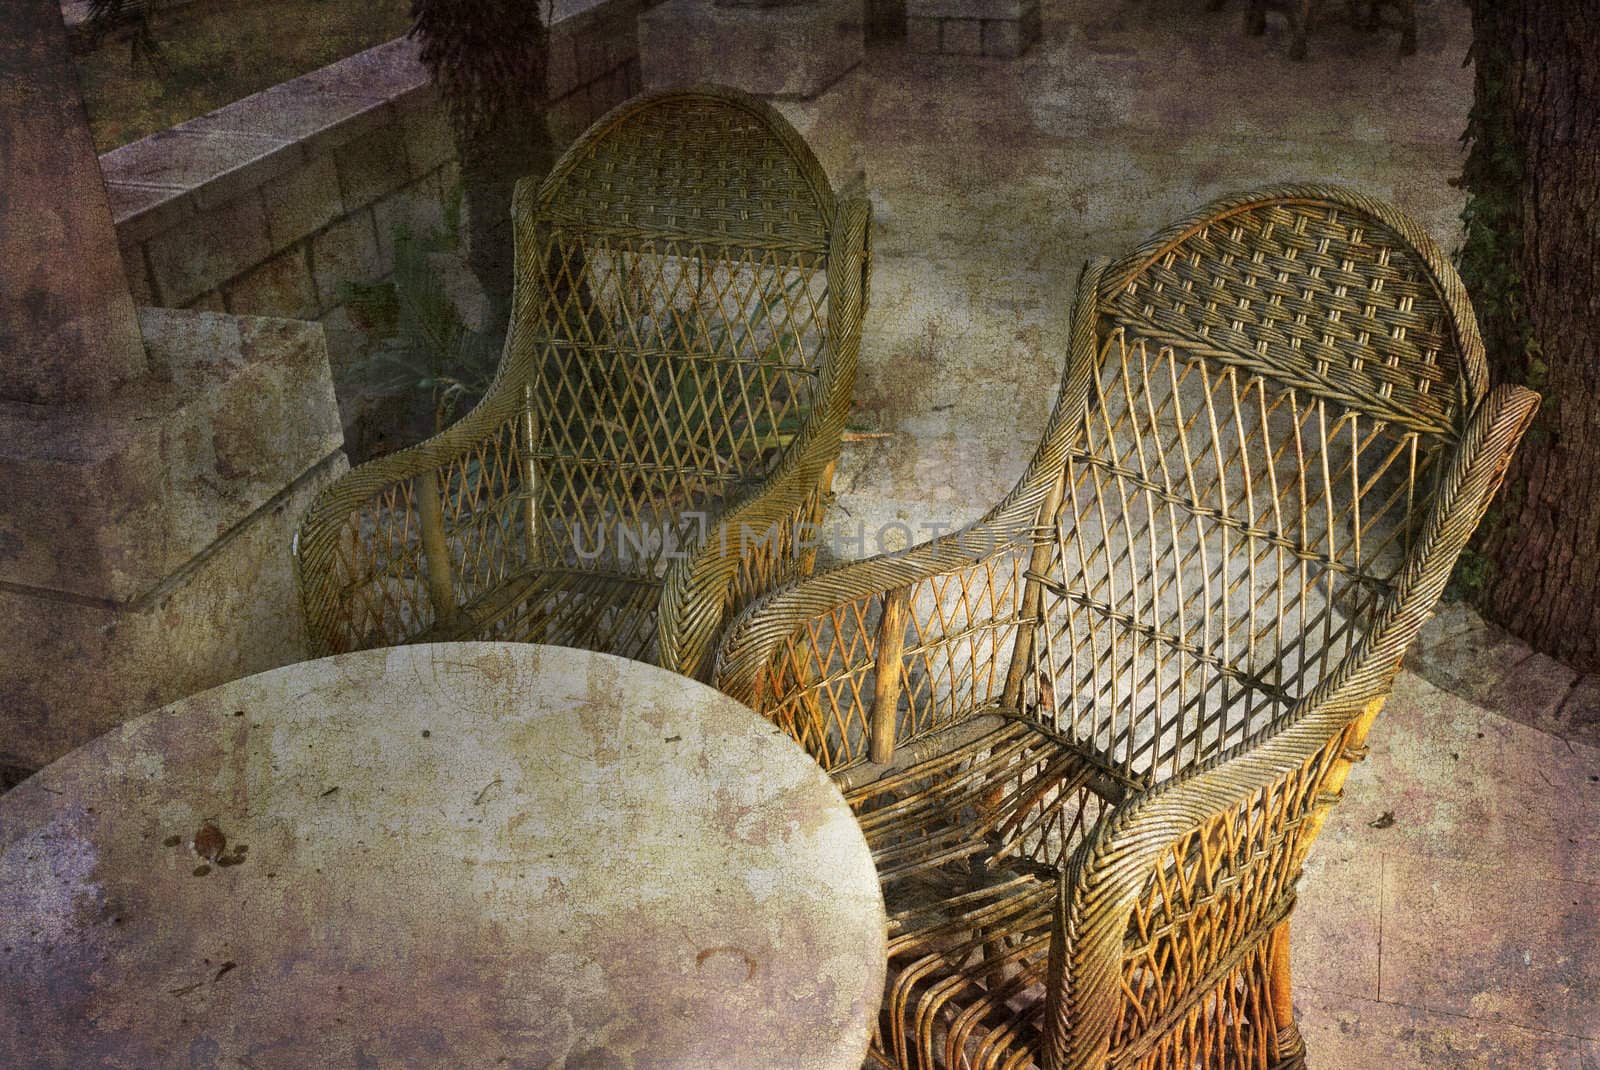 Basket chairs in patio. Postcard from Croatia. Several of my photos worked together to reflect age and time.